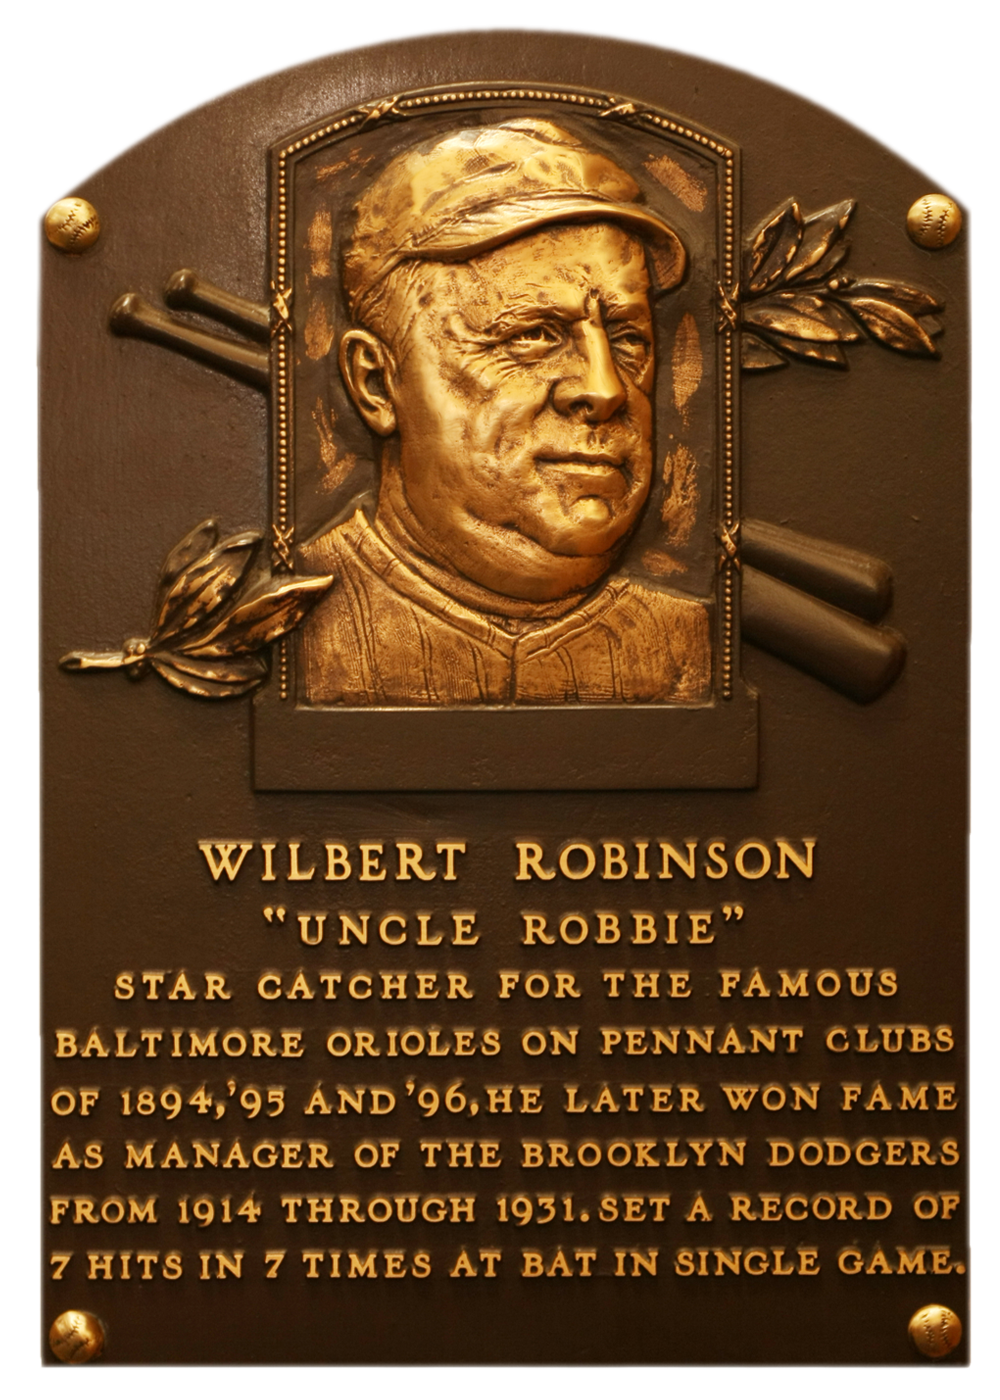 Wilbert Robinson Hall of Fame plaque